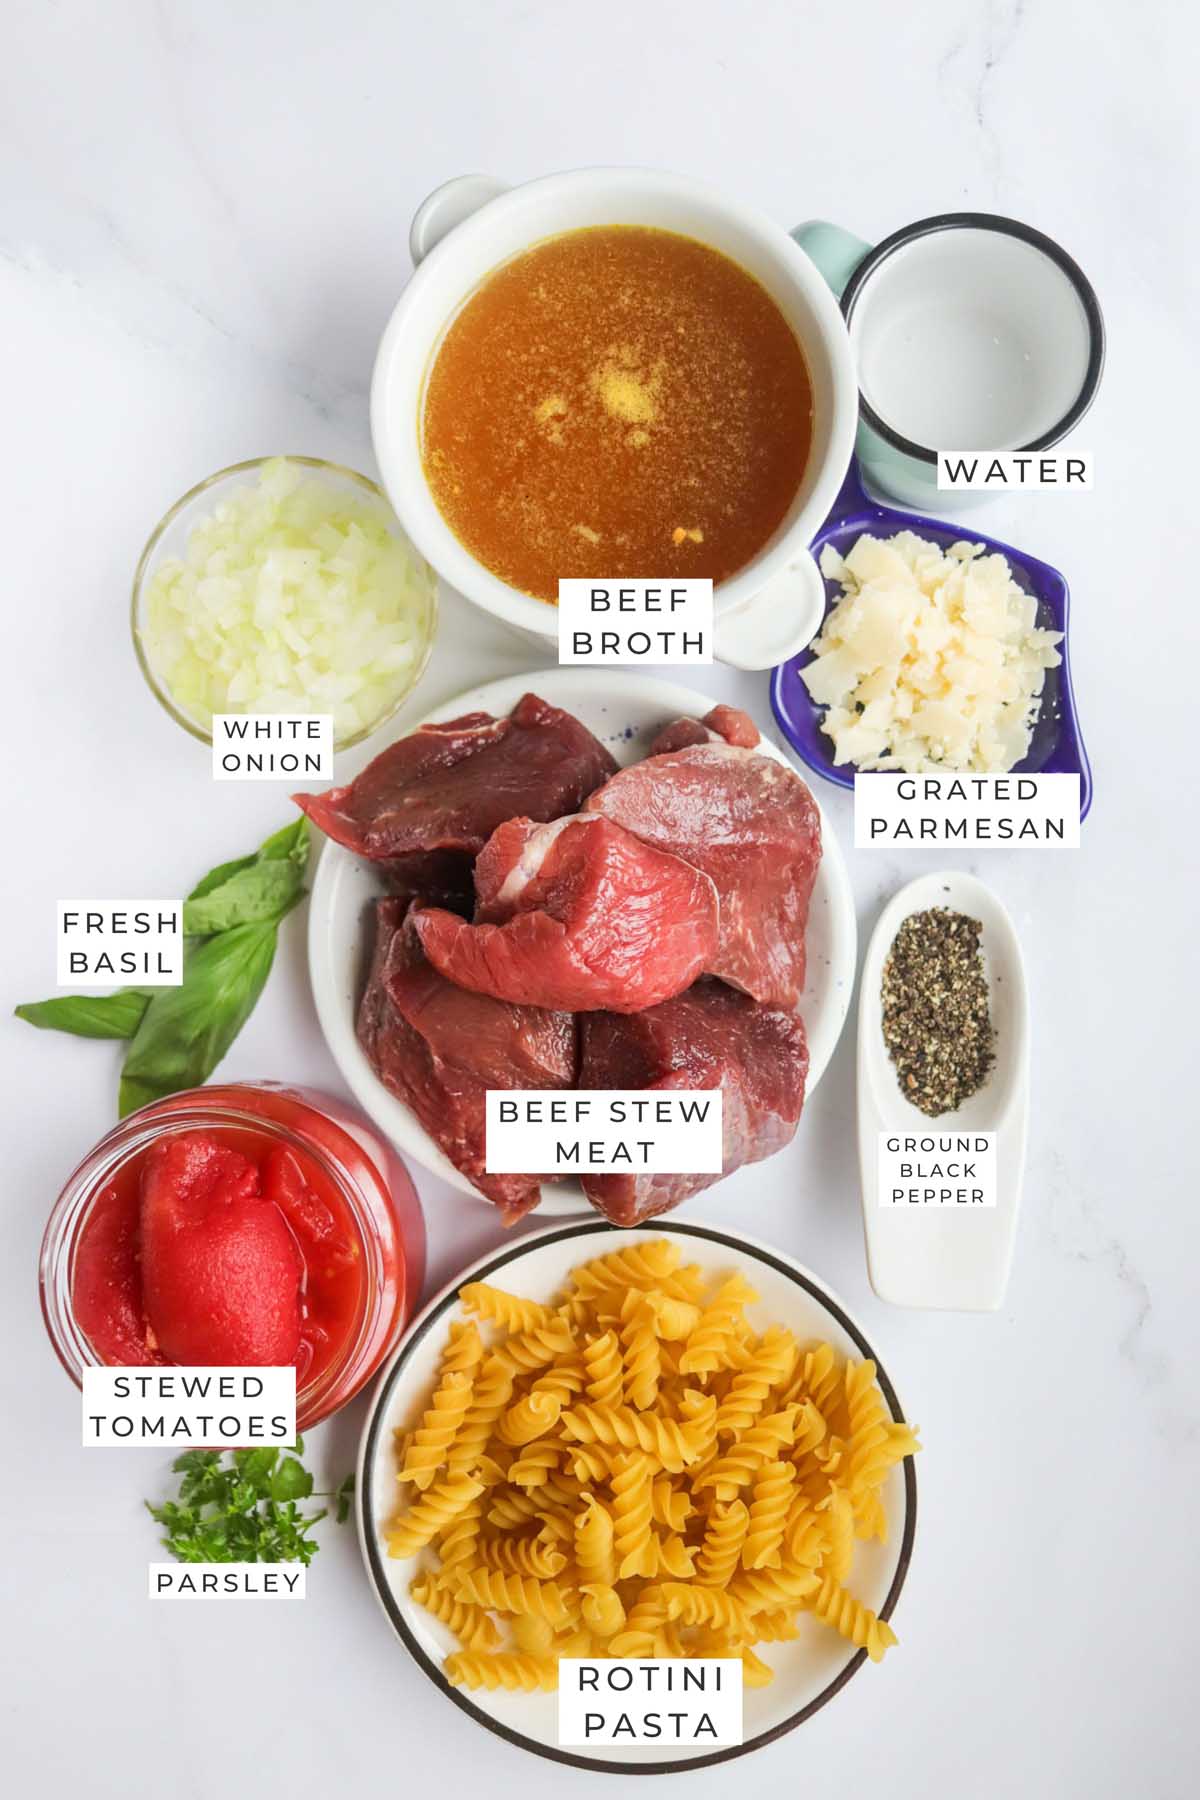 Labeled ingredients for the beef and noodles.